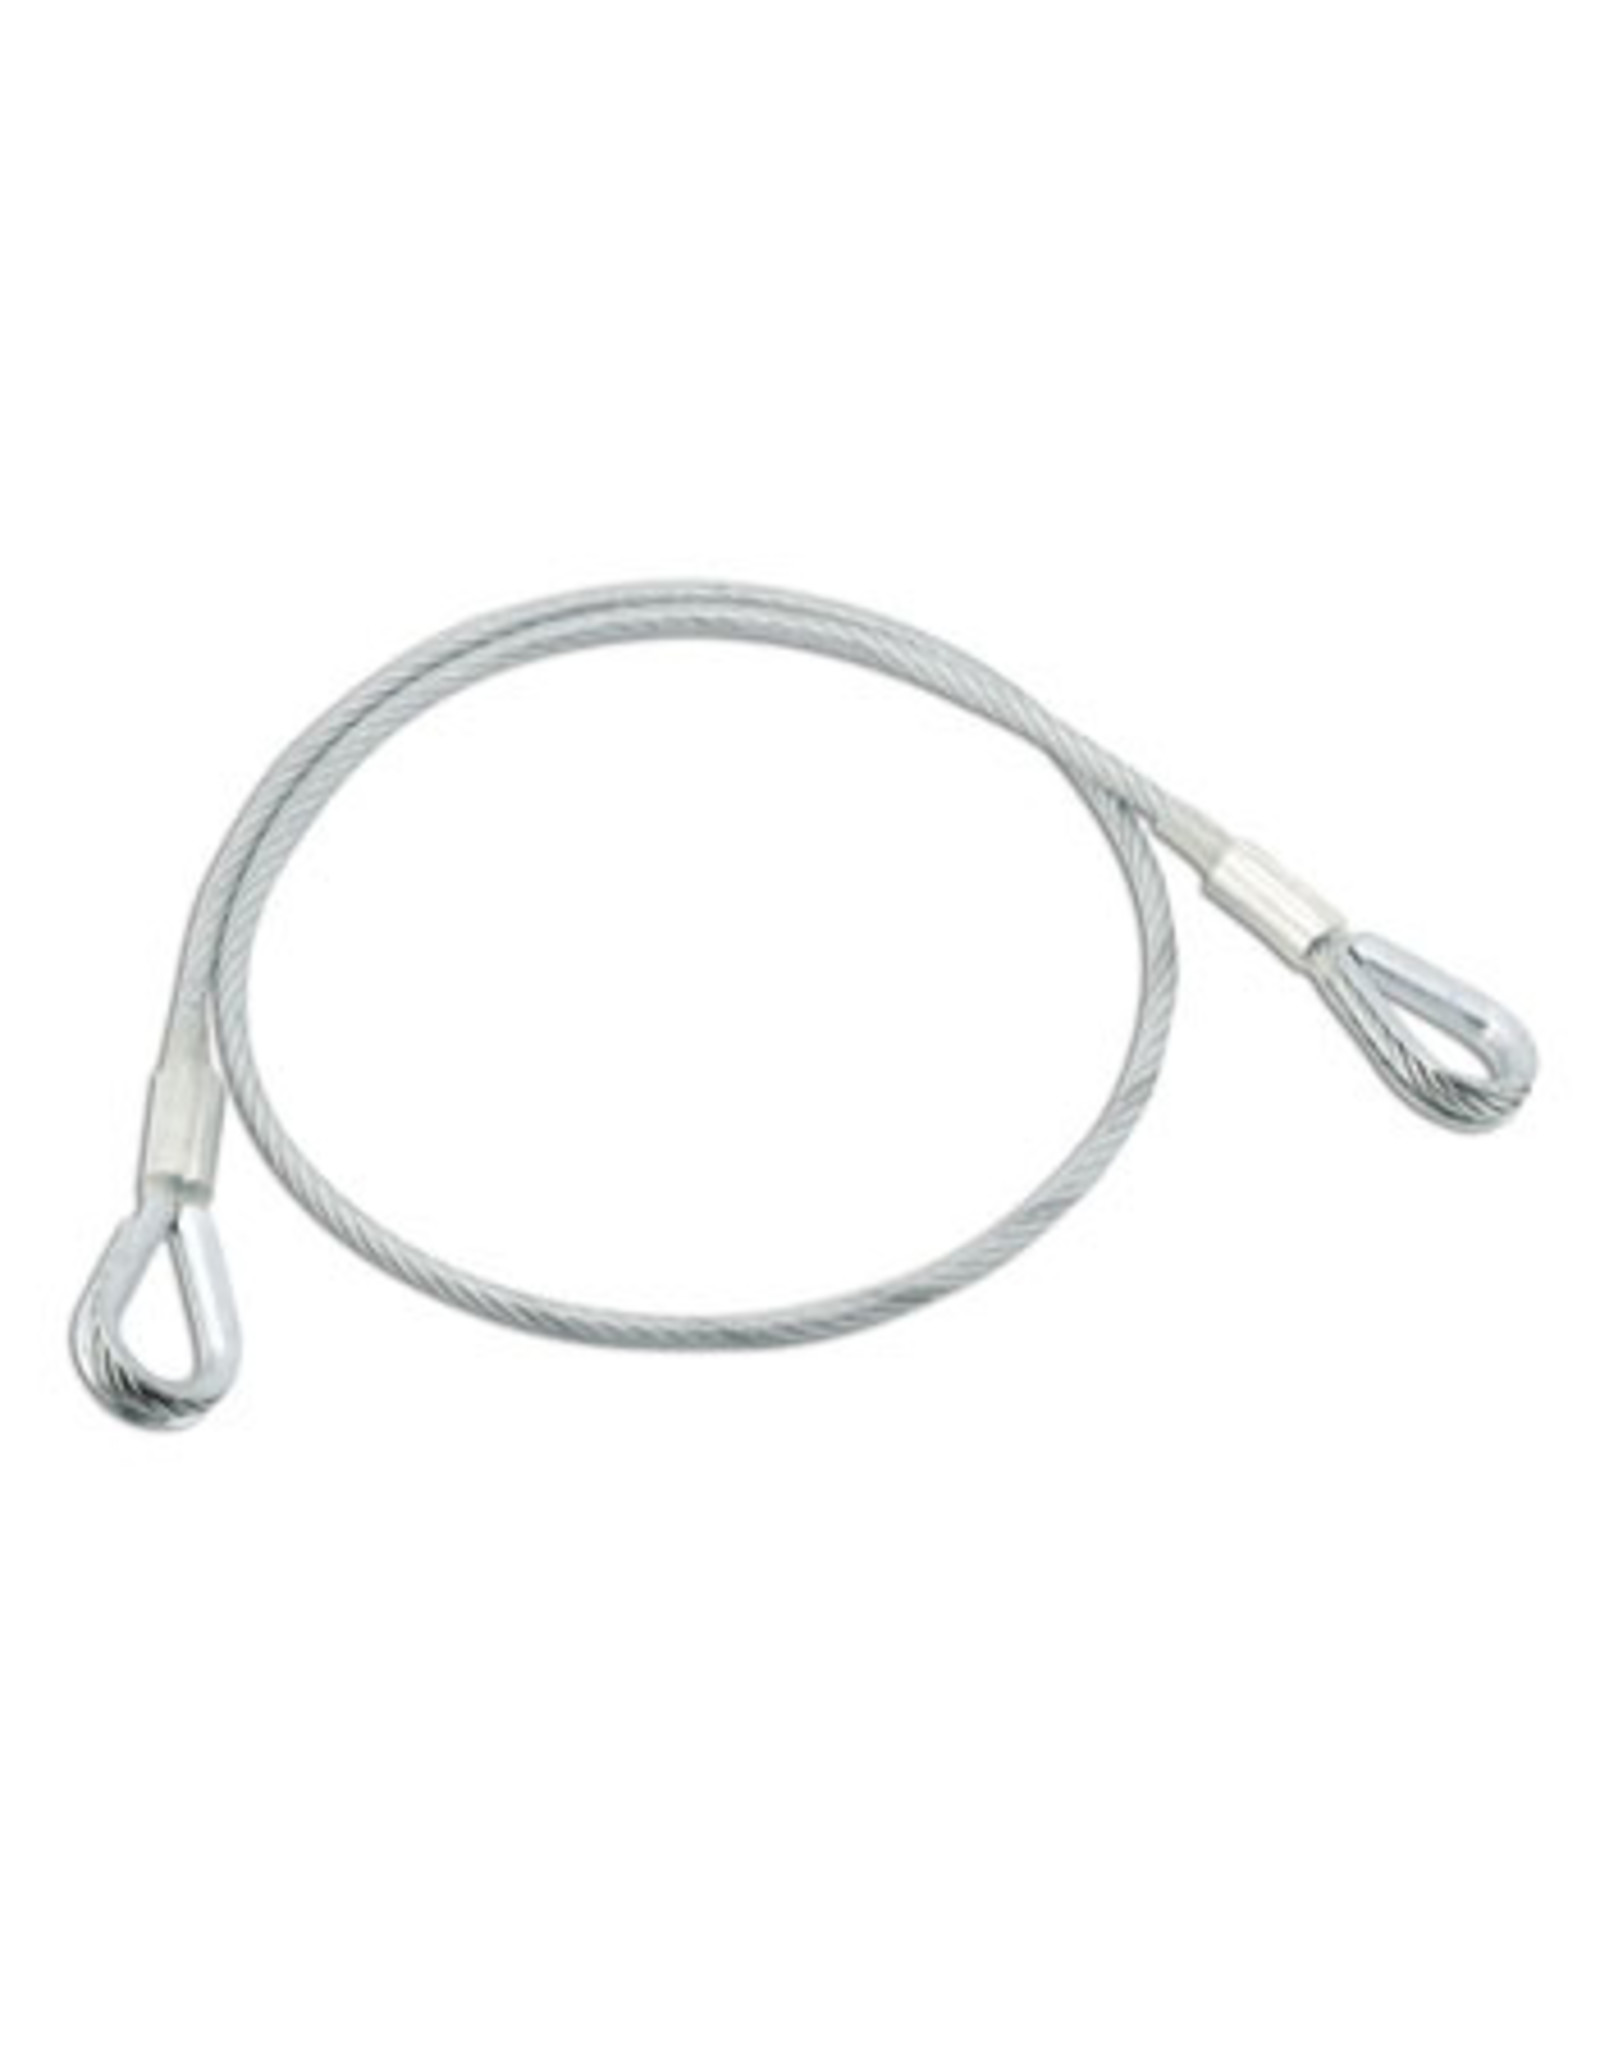 Cable Sling 1/4 in (6 mm) galvanized steel Cable w/ swaged eyes at each end. PVC Coated